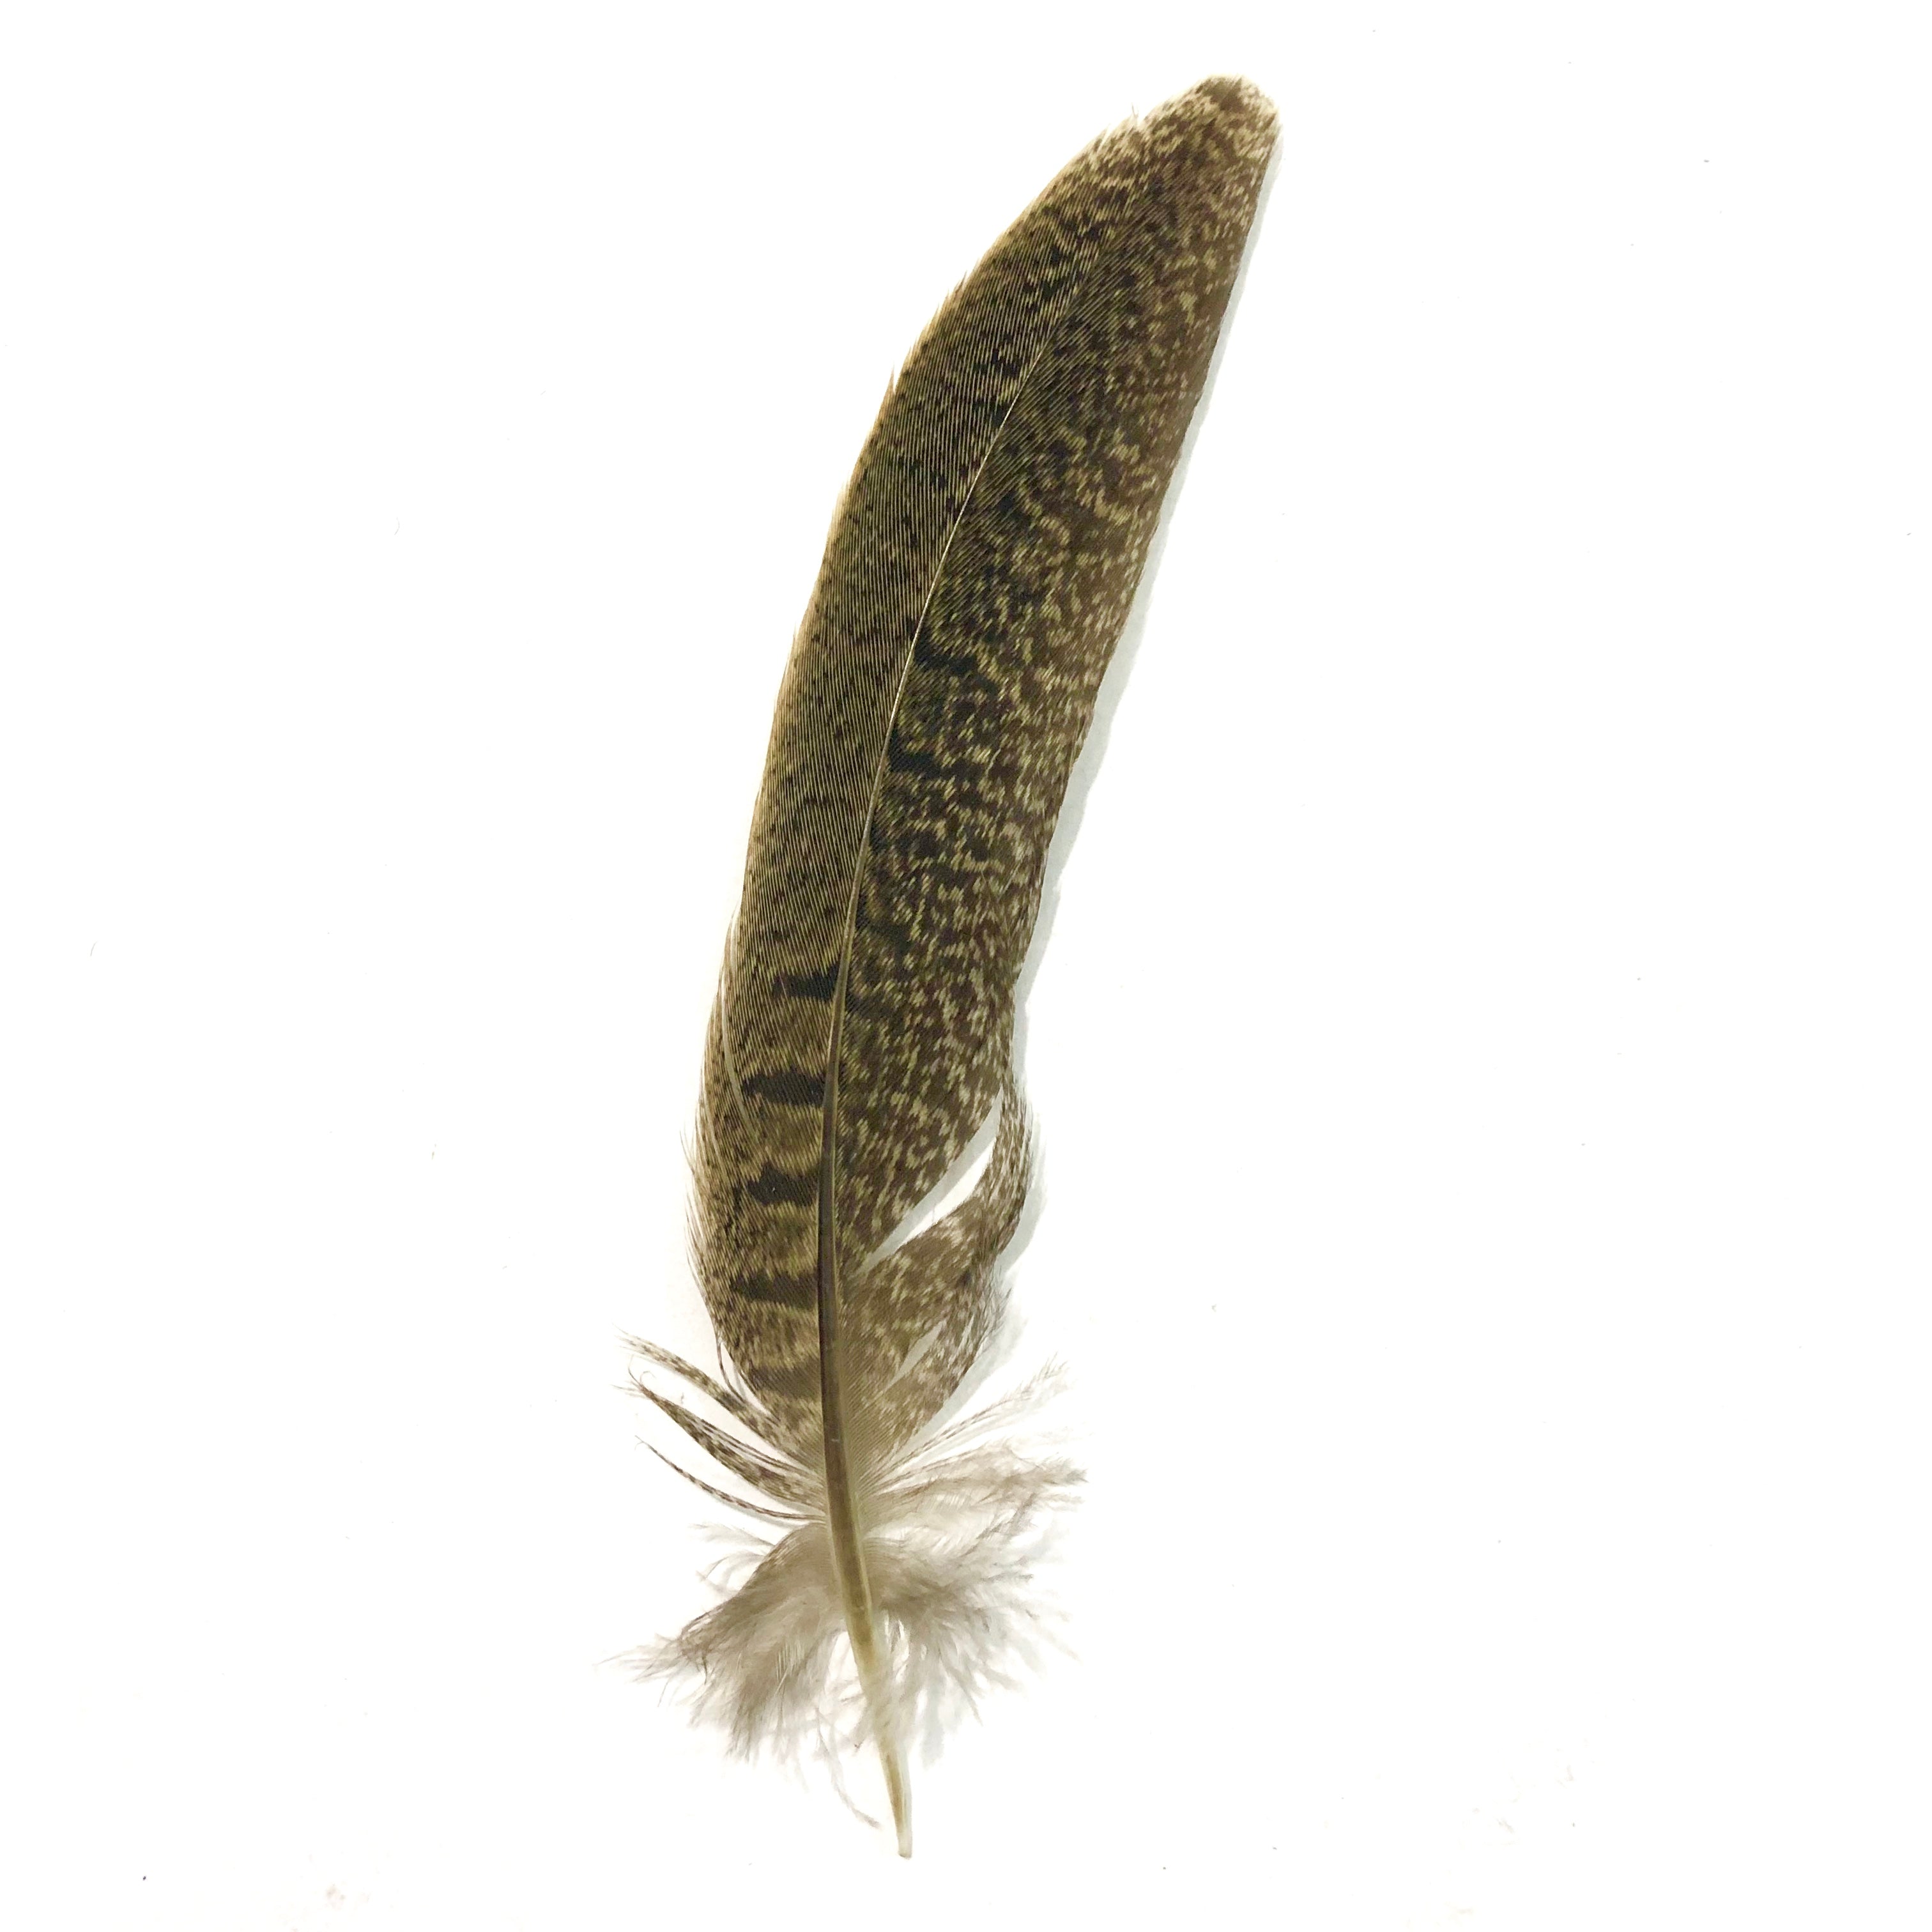 Under 6" Ringneck Pheasant Tail Feather x 10 pcs - Natural ((SECONDS))